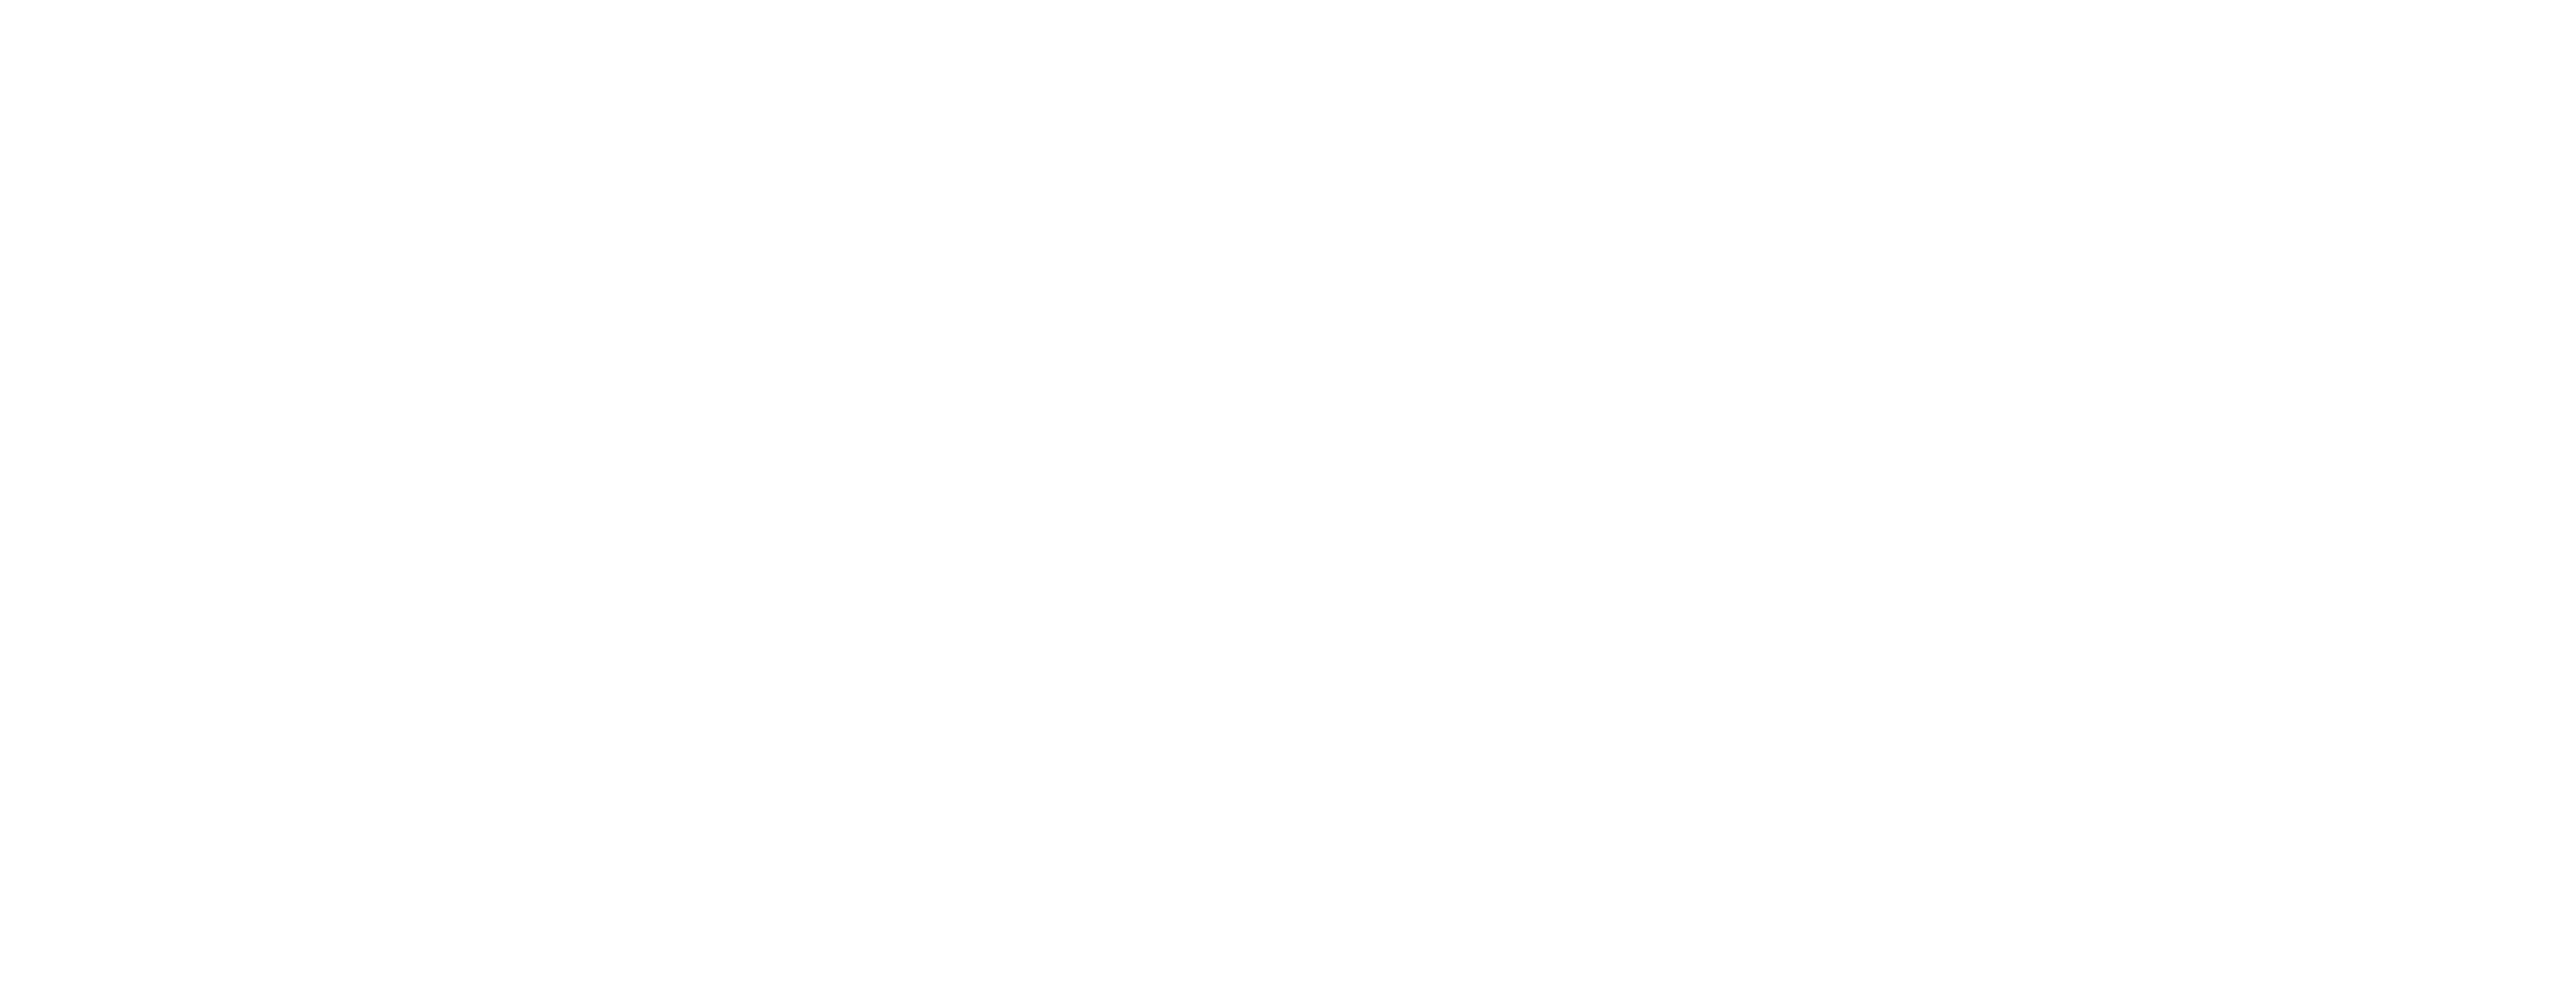 hertiage lottery fund